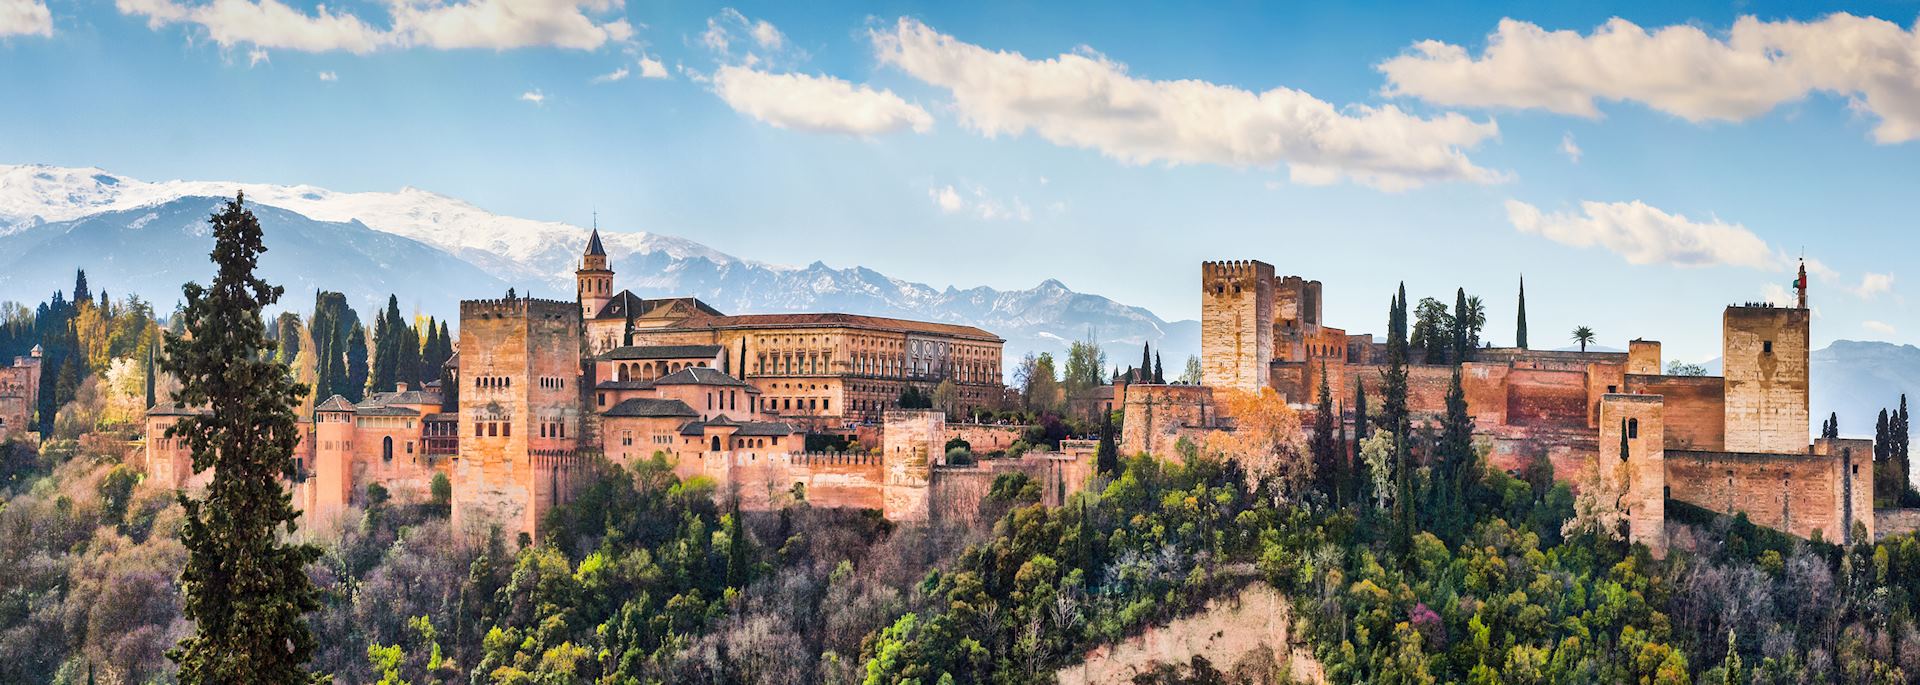 Alhambra, Andalusia